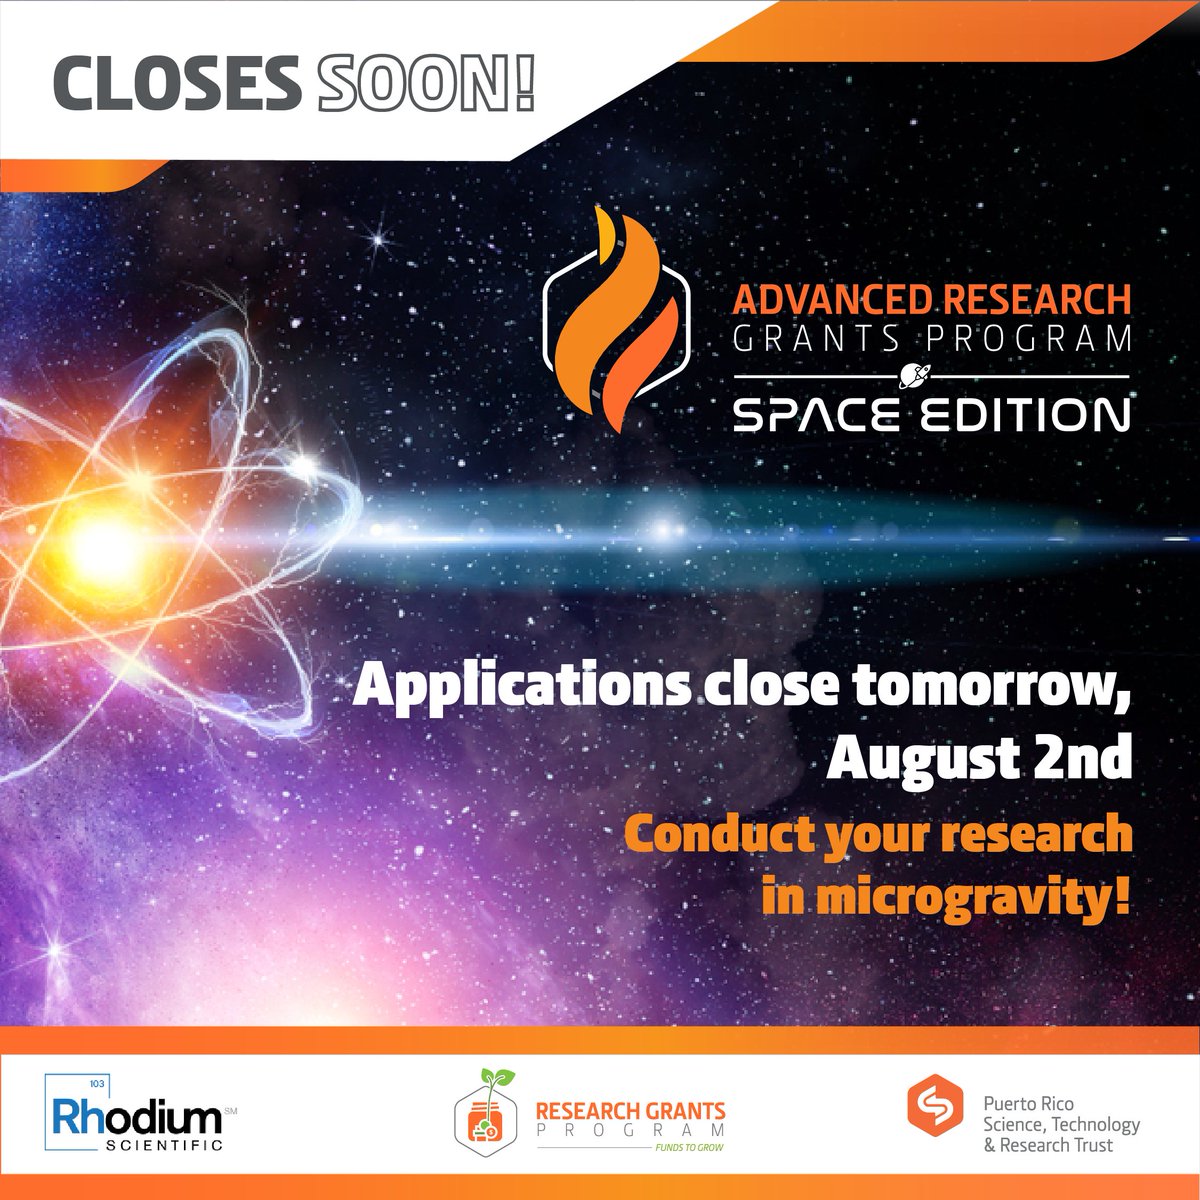 🚨 Applications close tomorrow! Send your research to space 🛰️ Don't miss this opportunity! Apply now until August 2nd. Open to universities, startups, small companies, and research institutions. Apply now 🔗 prsciencetrust.org/arg-microgravi… 🤝 @RhScientific